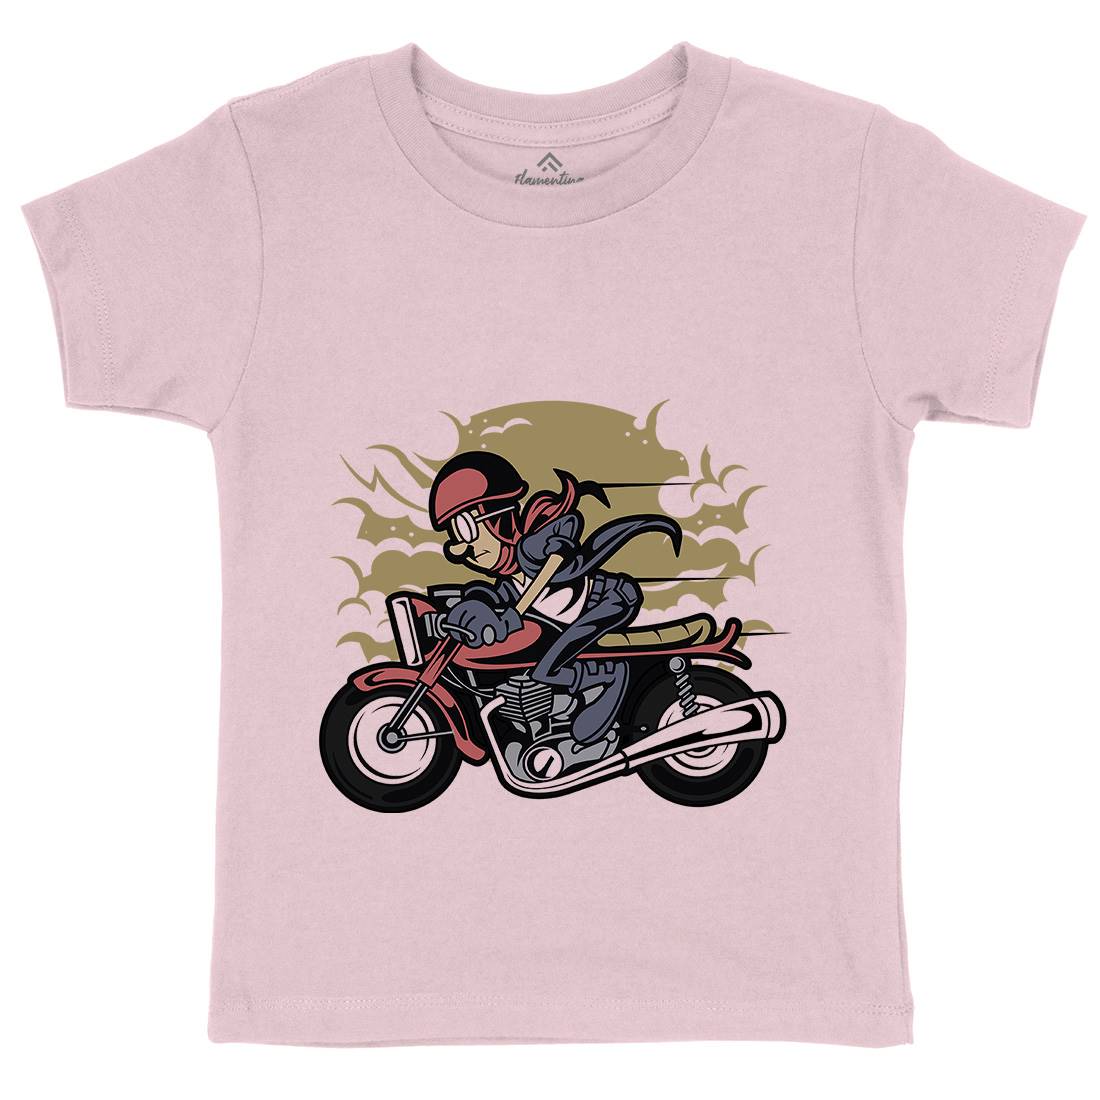 Caferacer Kids Crew Neck T-Shirt Motorcycles C325